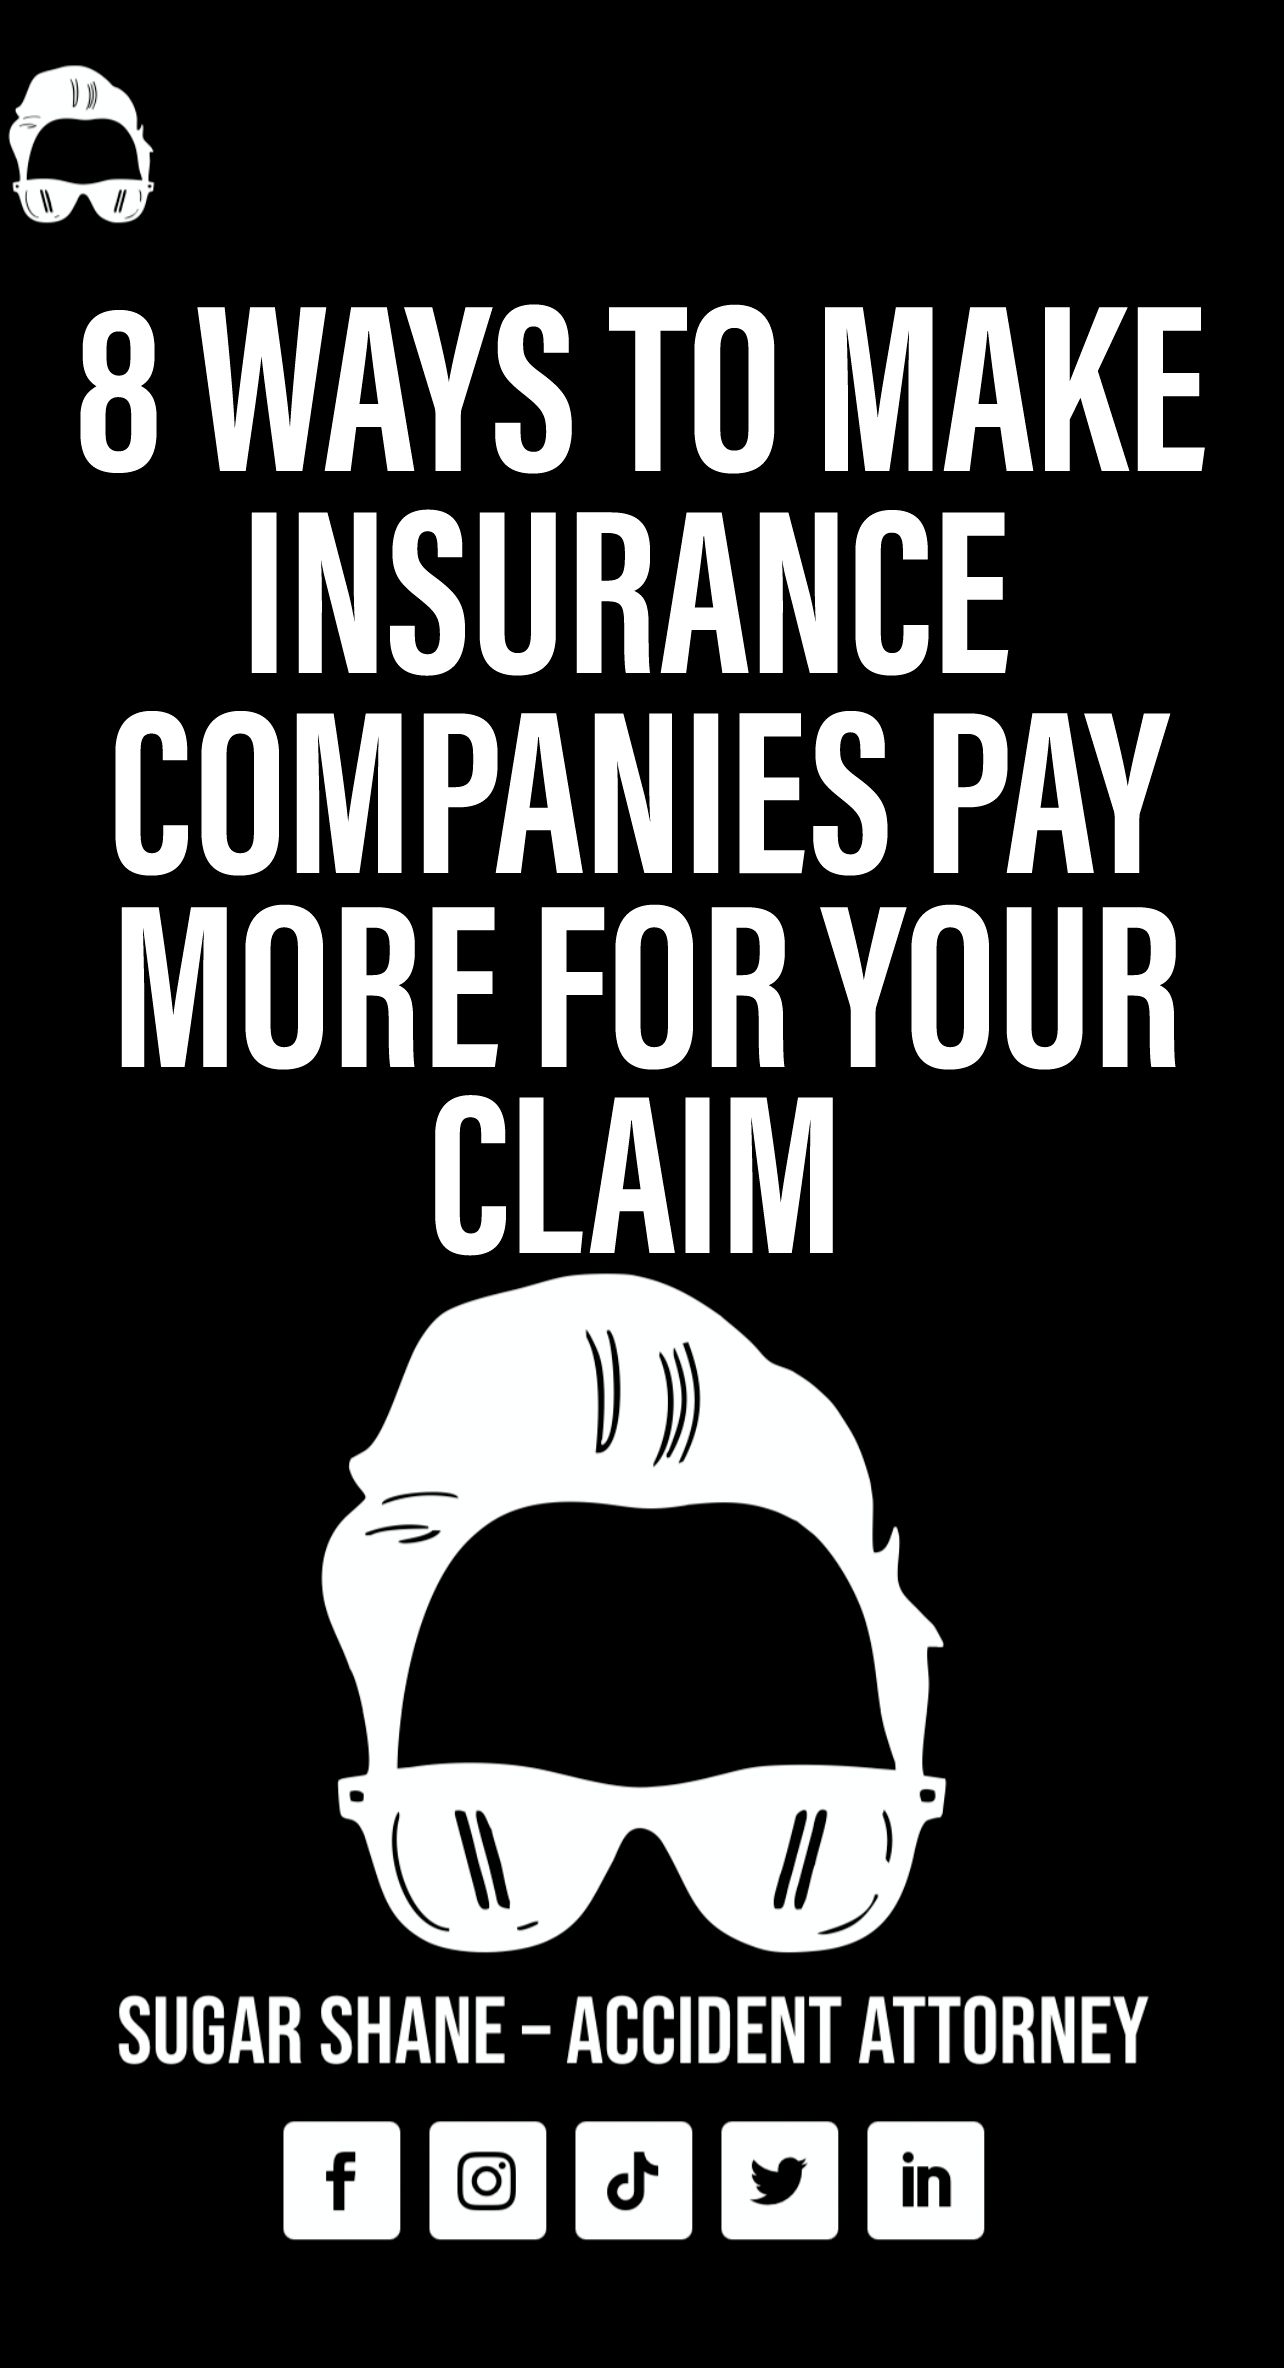 8 WAYS TO MAKE INSURANCE COMPANIES PAY MORE FOR YOUR CLAIM